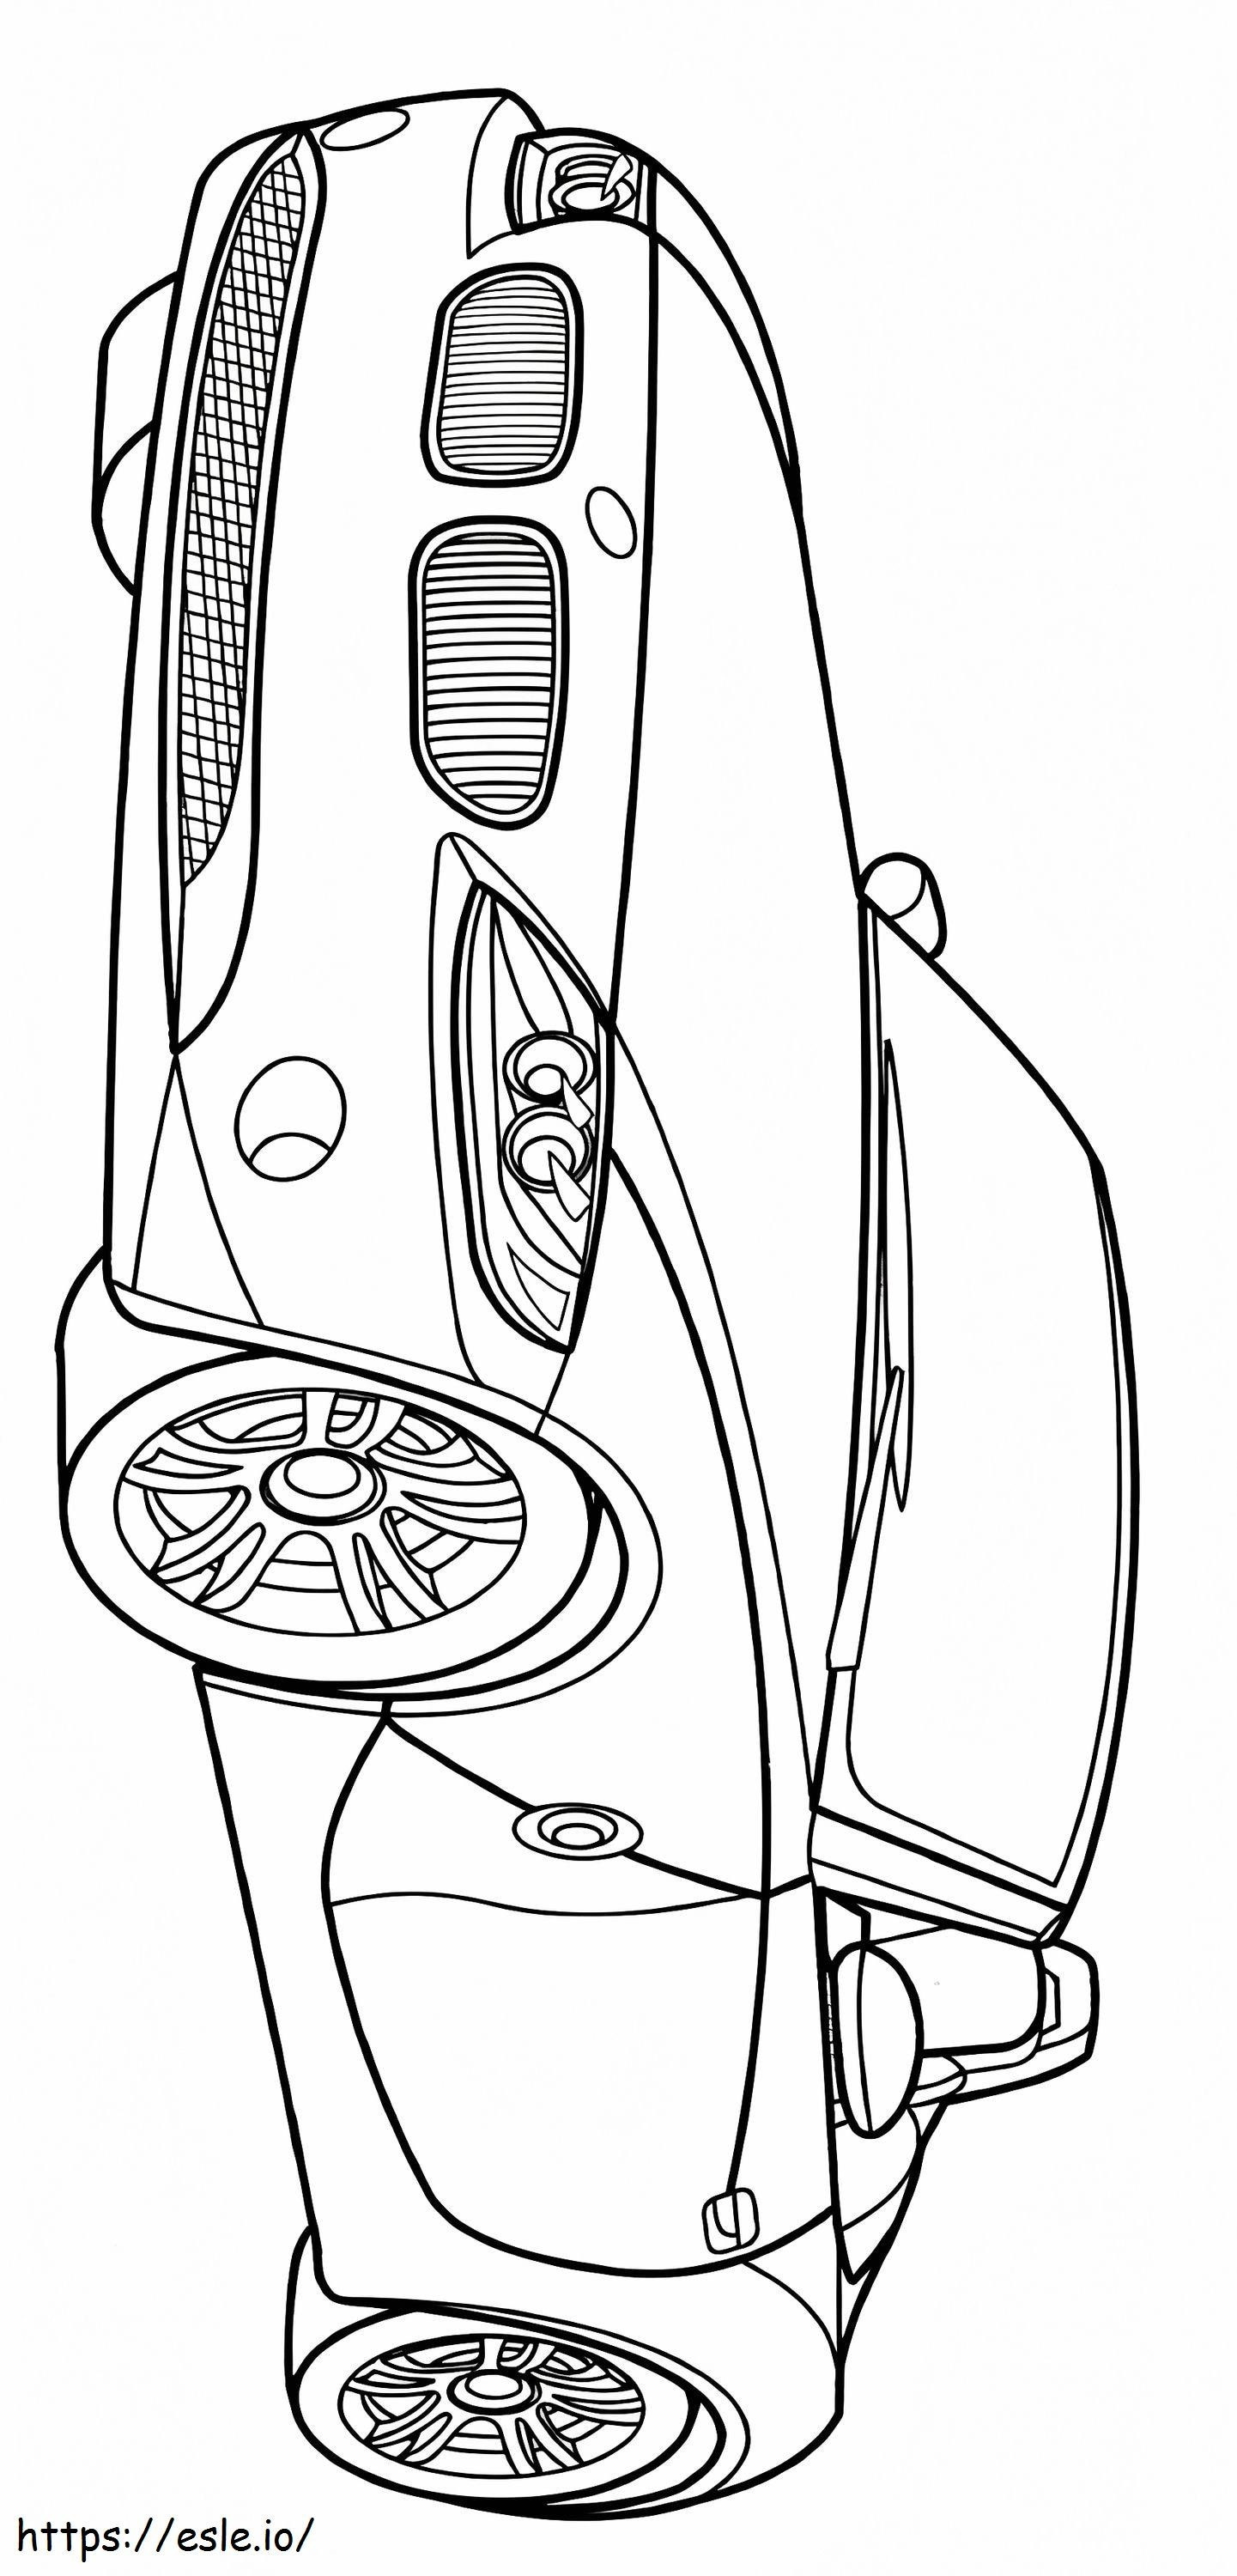 1560763464 Bmw Z4 A4 coloring page